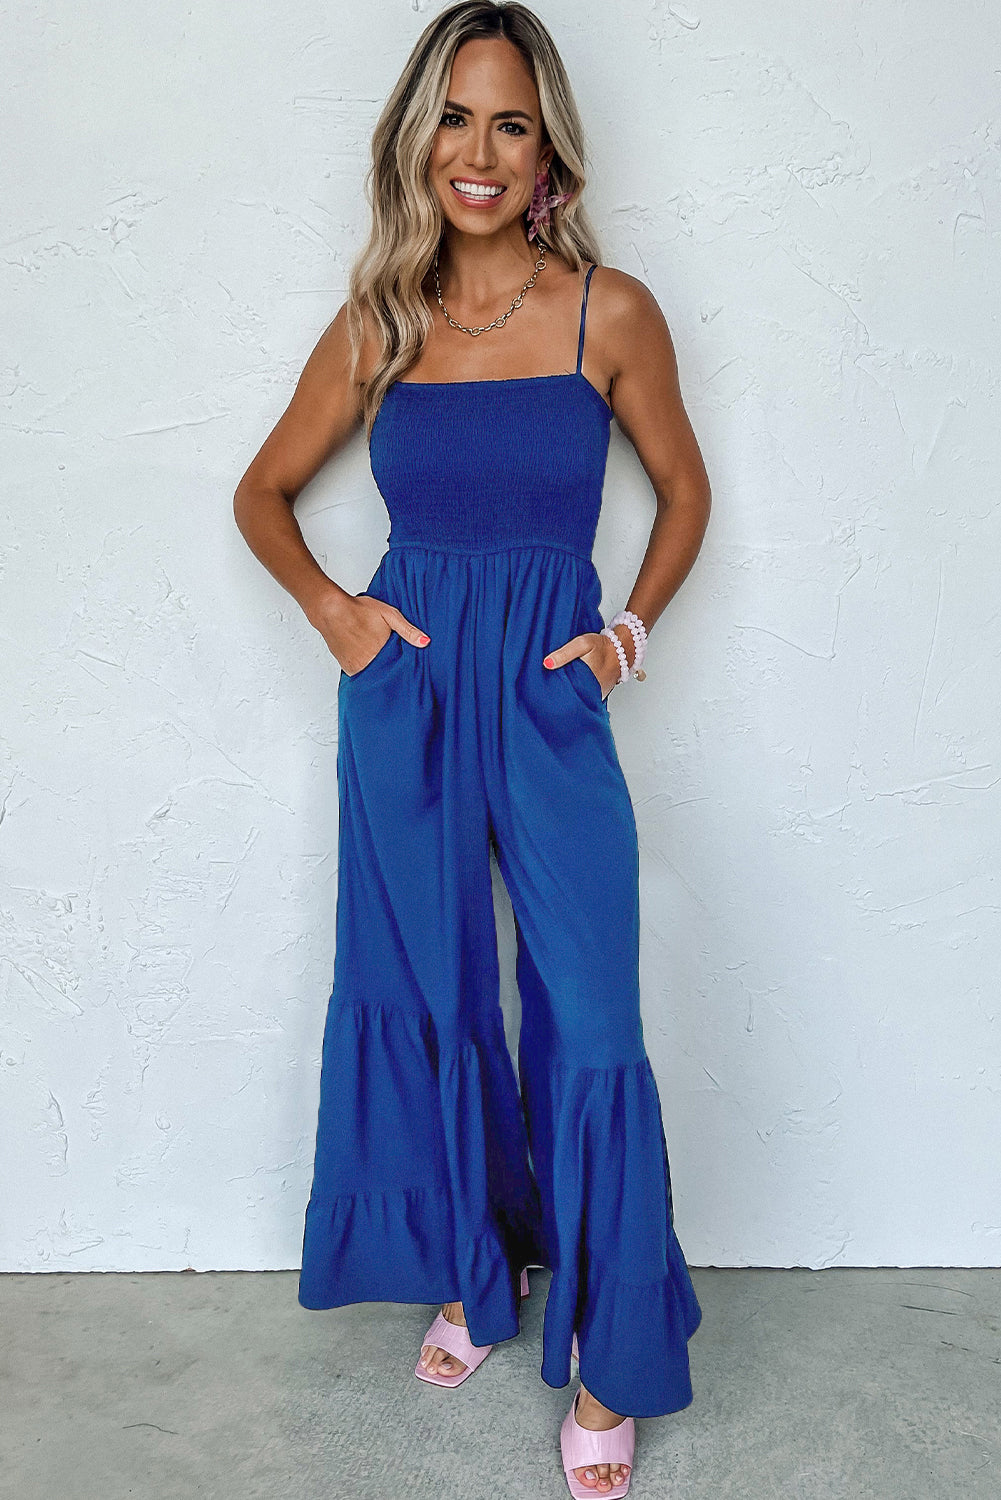 Chic Elegance: Navy Blue Spaghetti Straps Jumpsuit with Ruffled Details